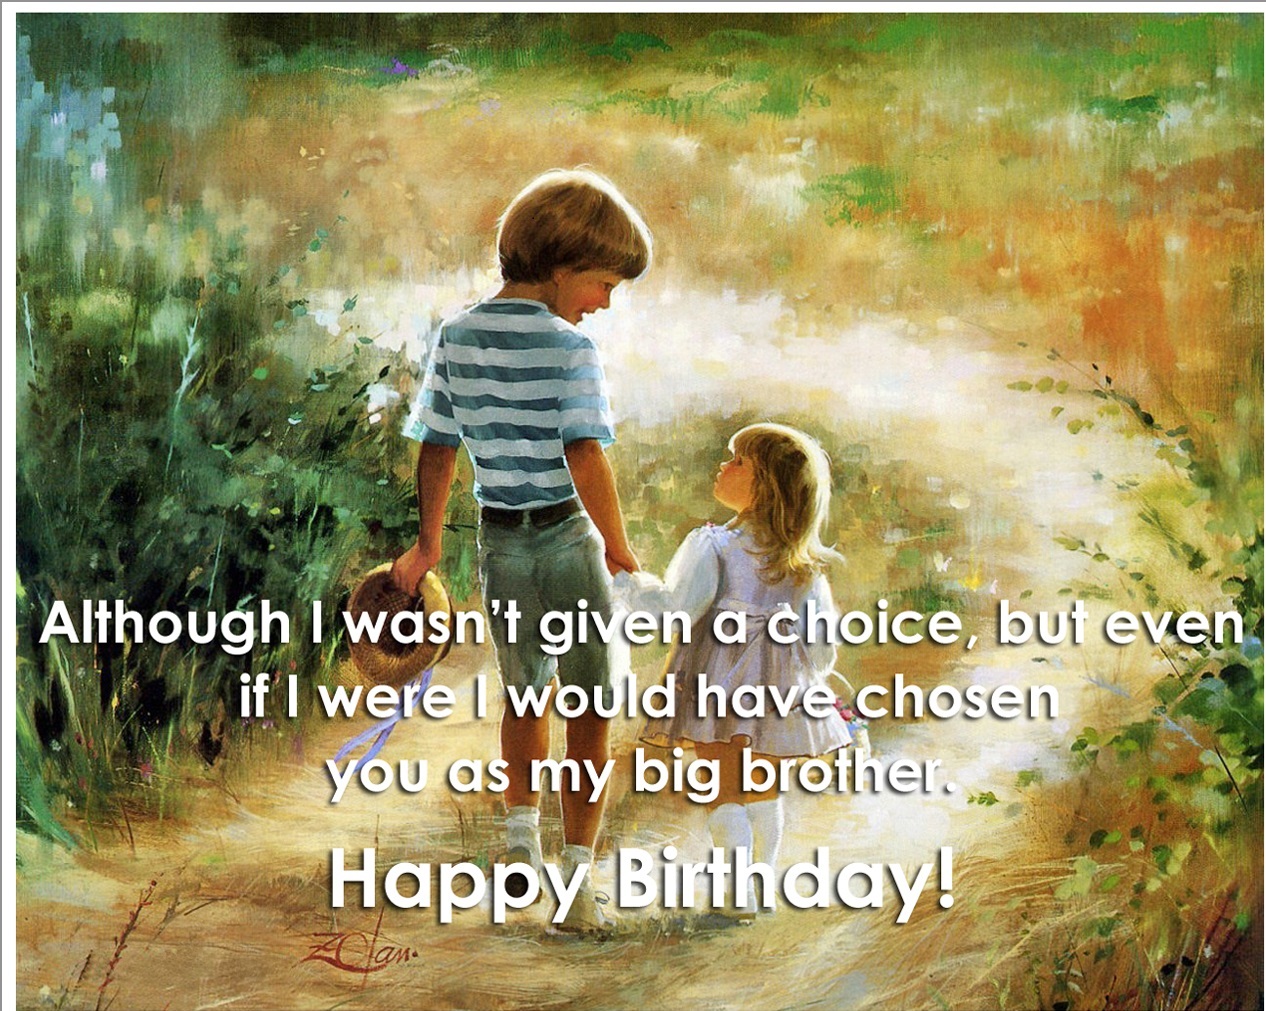 Cute Happy Birthday Quotes wishes for brother - This Blog About Health